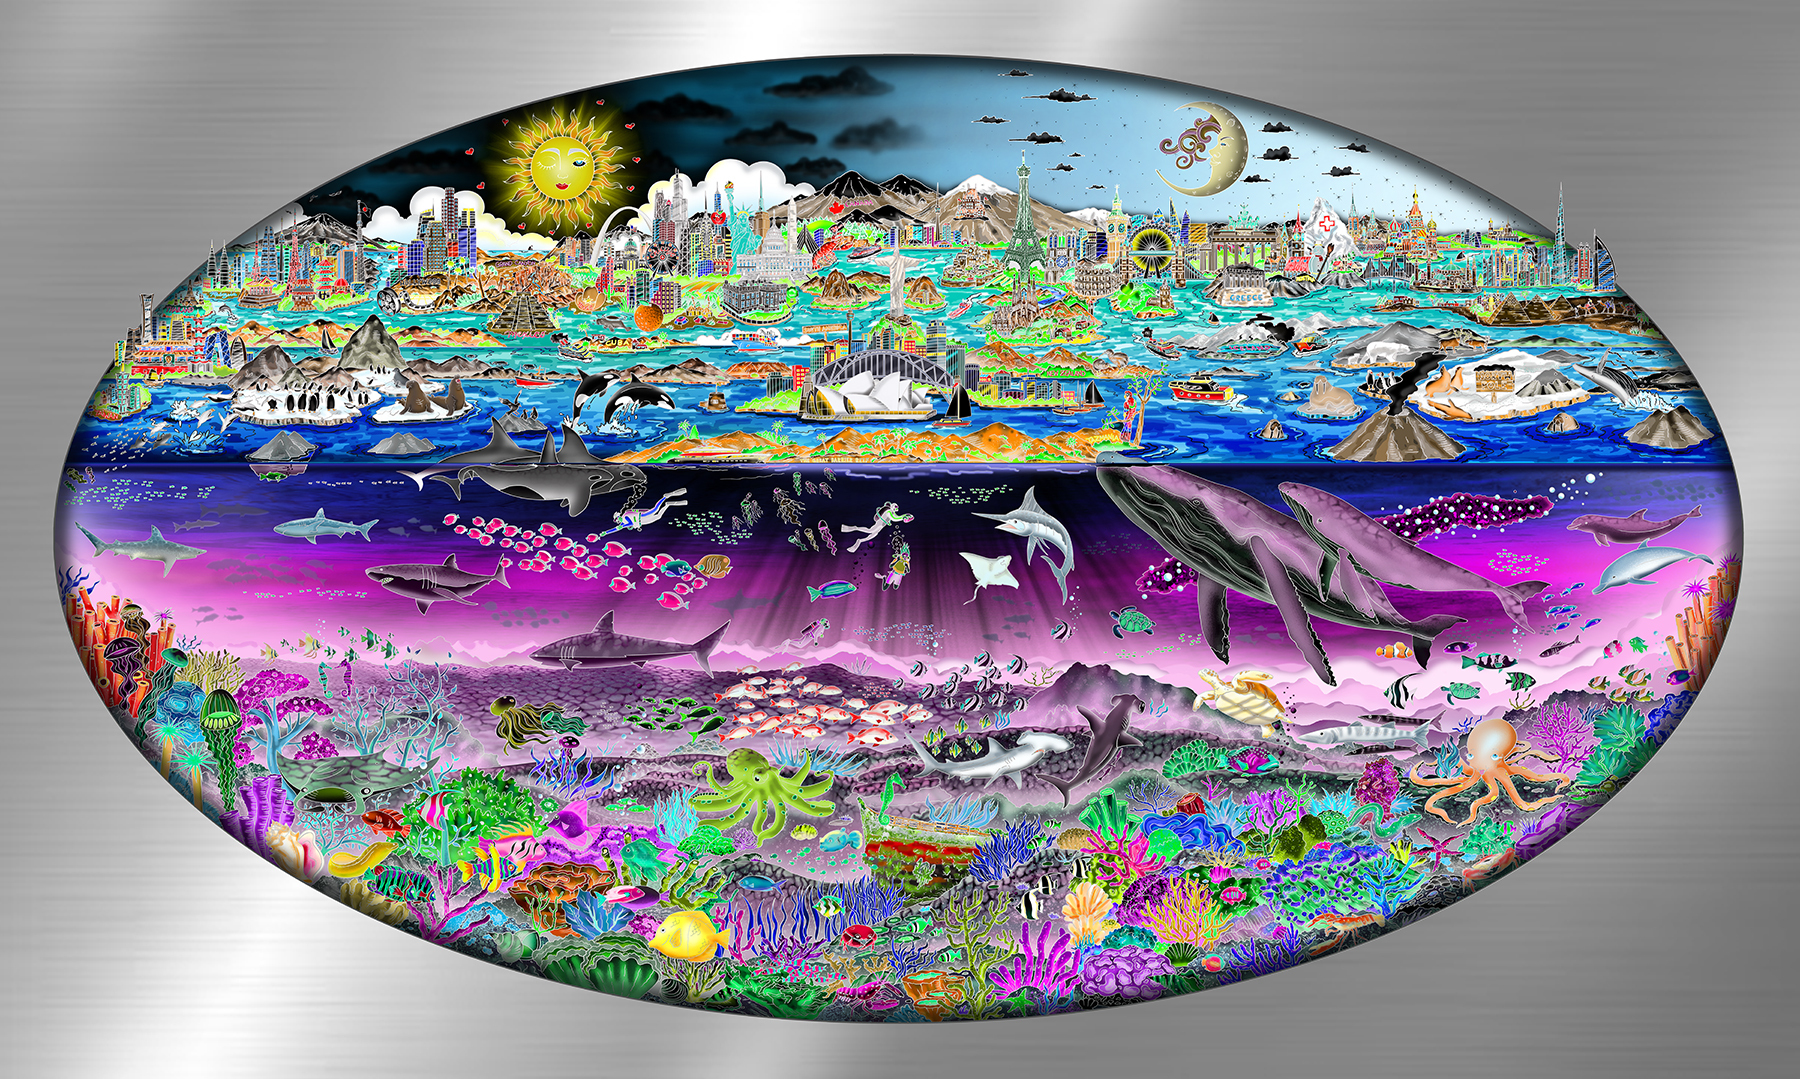 Charles Fazzino Our Oceans... The Tides of Life (AP) (Psychedelic Image on Silver Board)